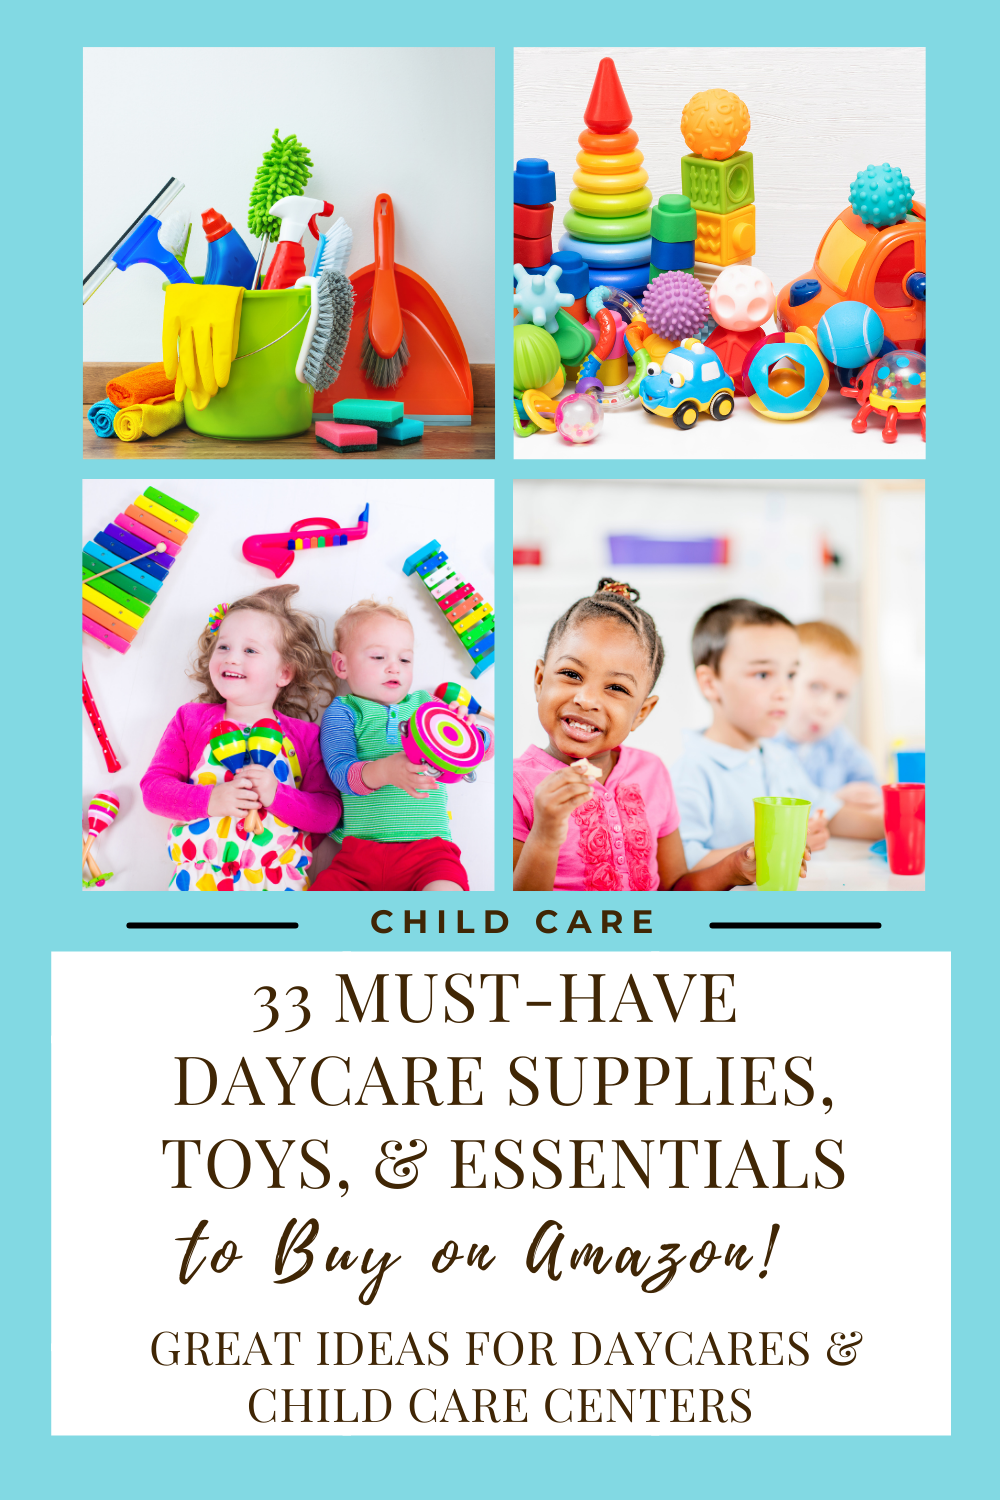 33 Must-Have Daycare Supplies, Toys, & Essentials to Buy on